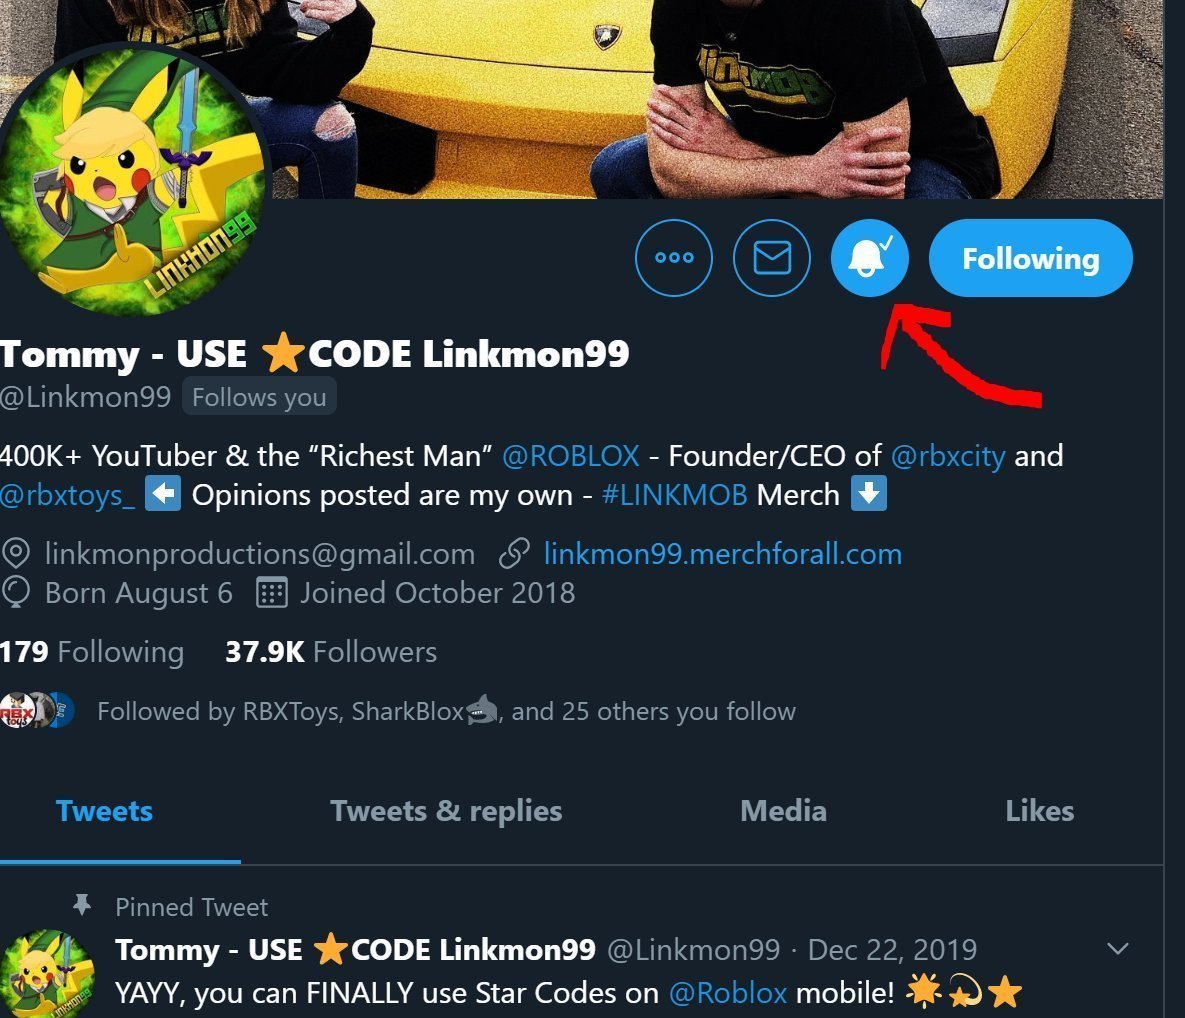 Tommy Use Code Linkmon99 On Twitter 𝟒 𝟎𝟎𝟎 𝐑𝐎𝐁𝐔𝐗